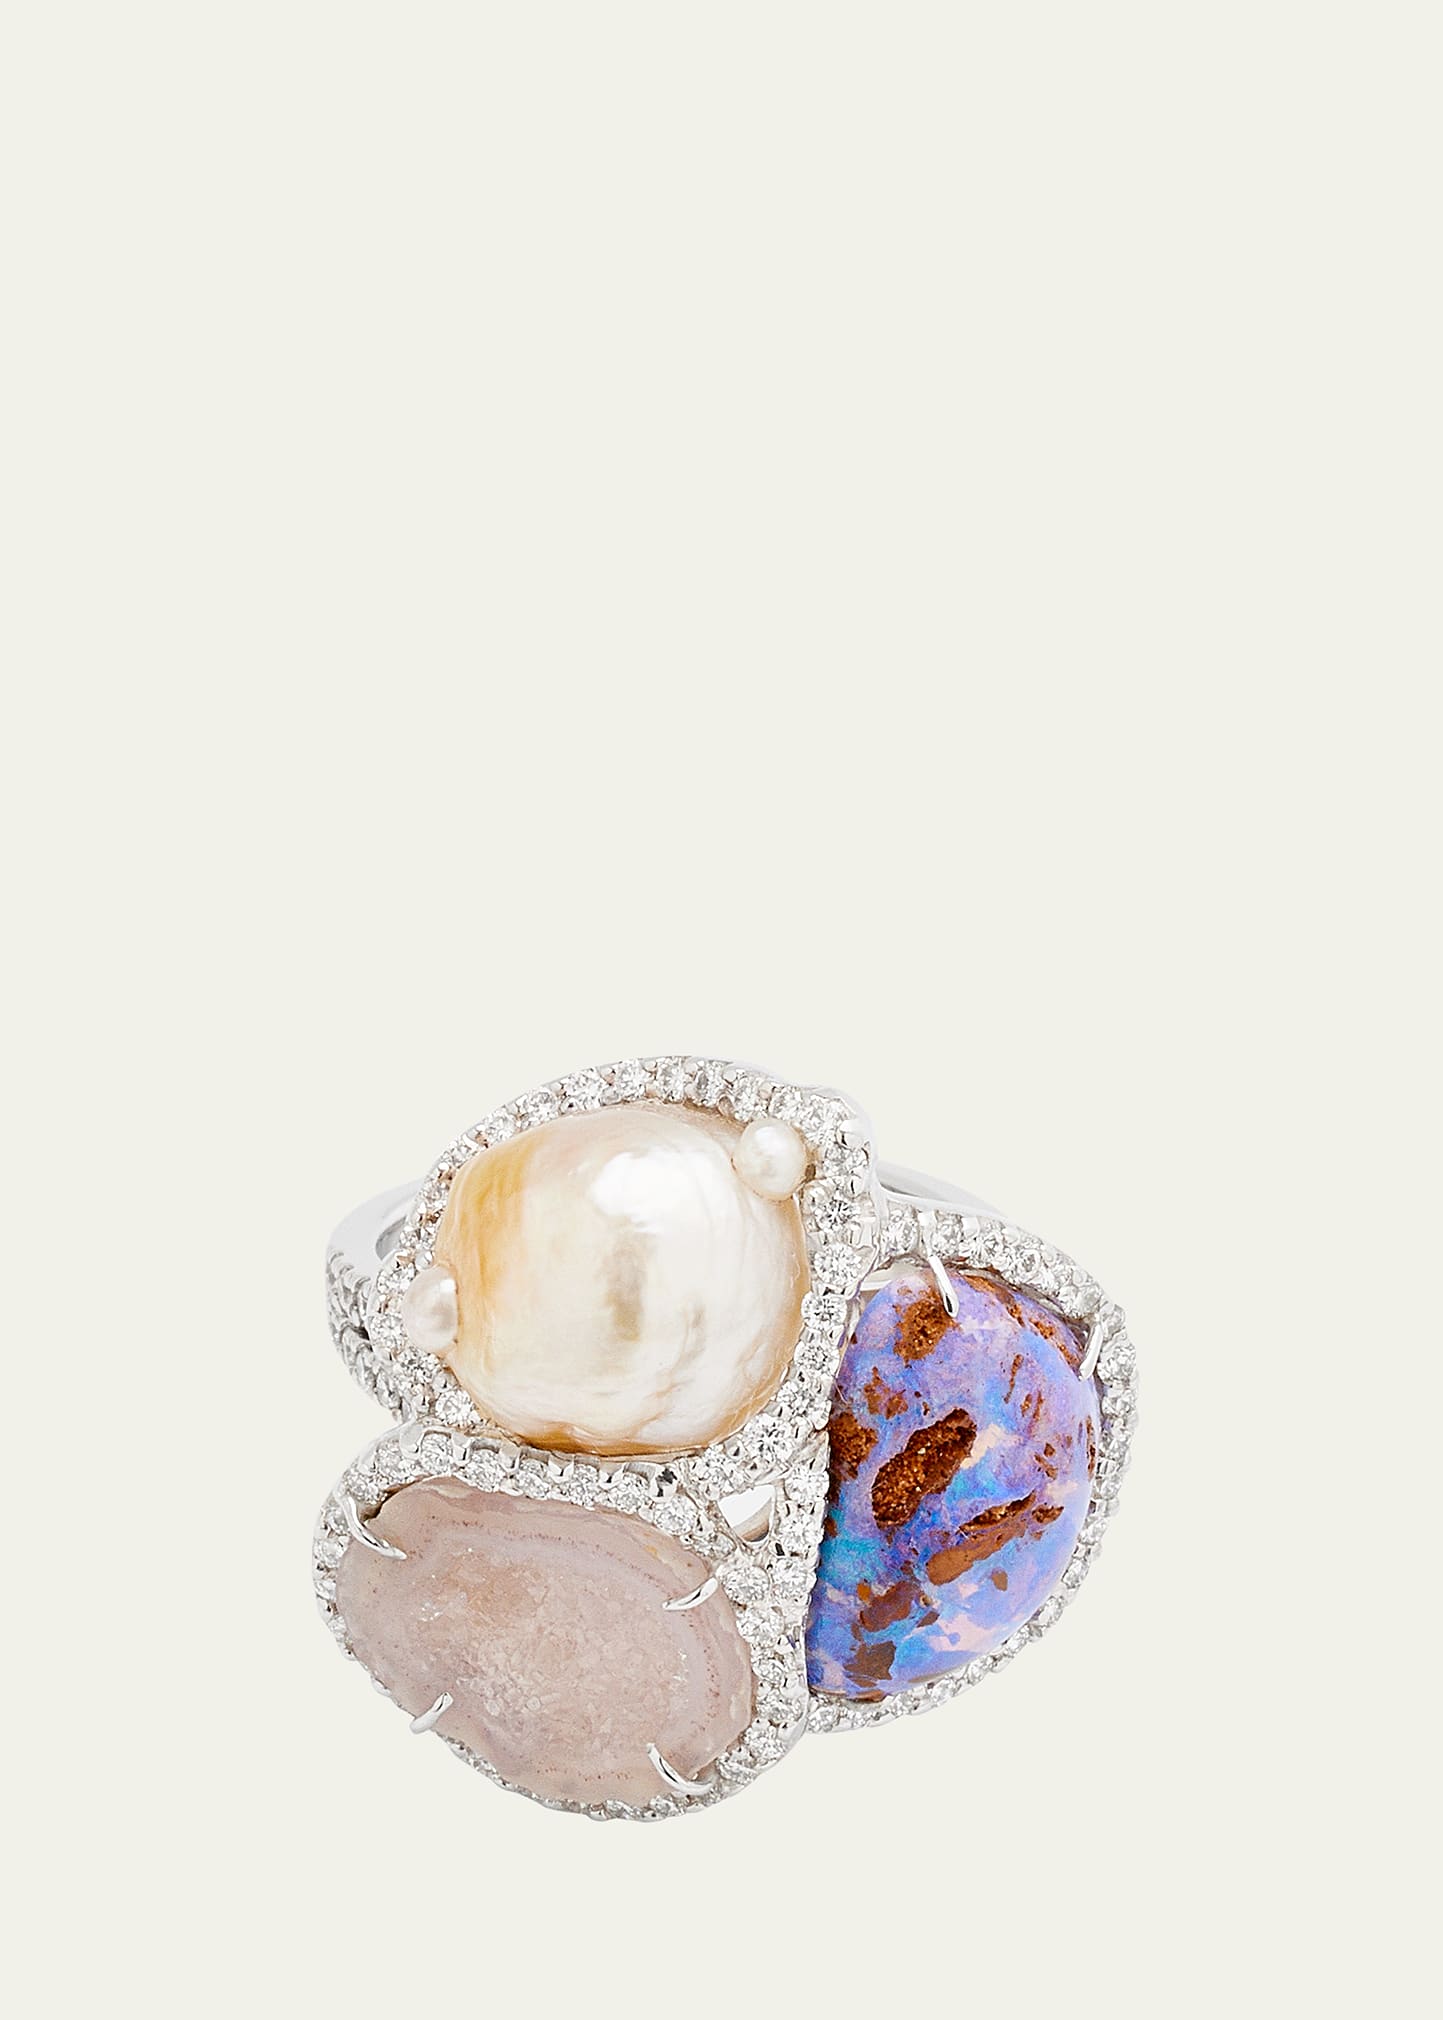 Kimberly Mcdonald White Gold Ring With Geode, Pearl, Opal And Diamonds In Multi